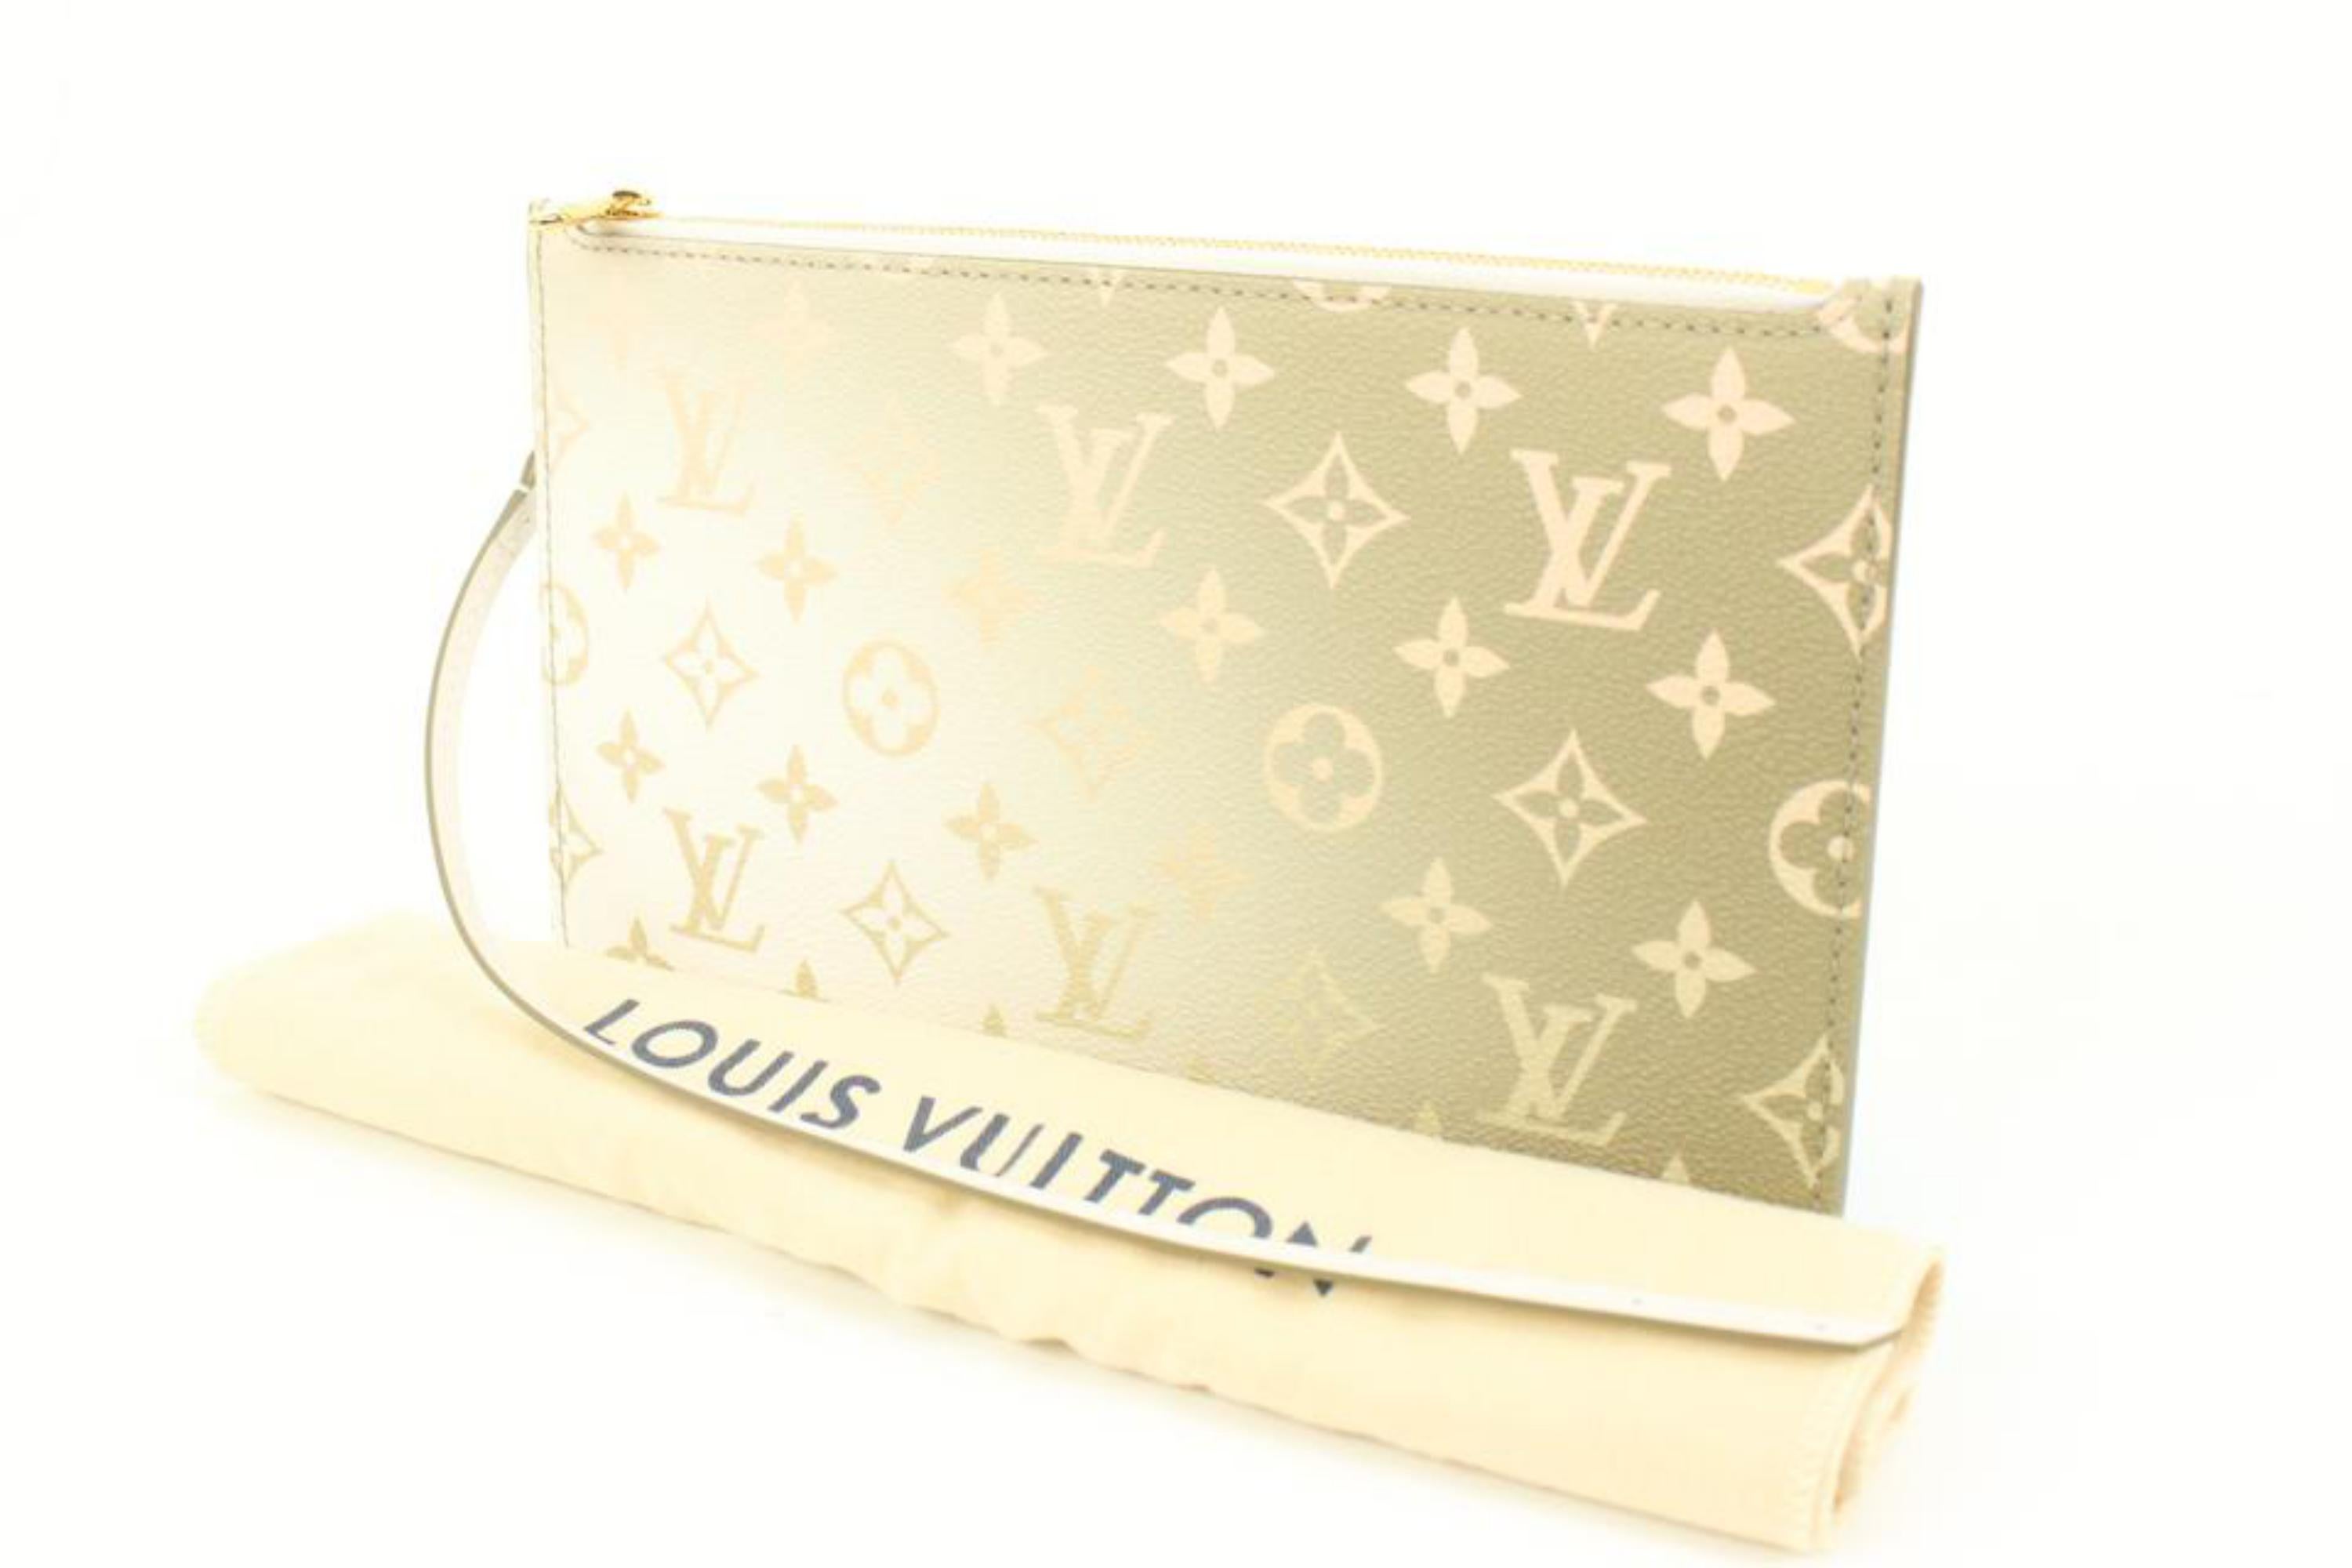 Louis Vuitton Monogram Khaki Sunset Neverfull Pochette MM/GM Wristlet Pouch 90lk412s
Date Code/Serial Number: RFID Chip
Made In: France
Measurements: Length:  9.75